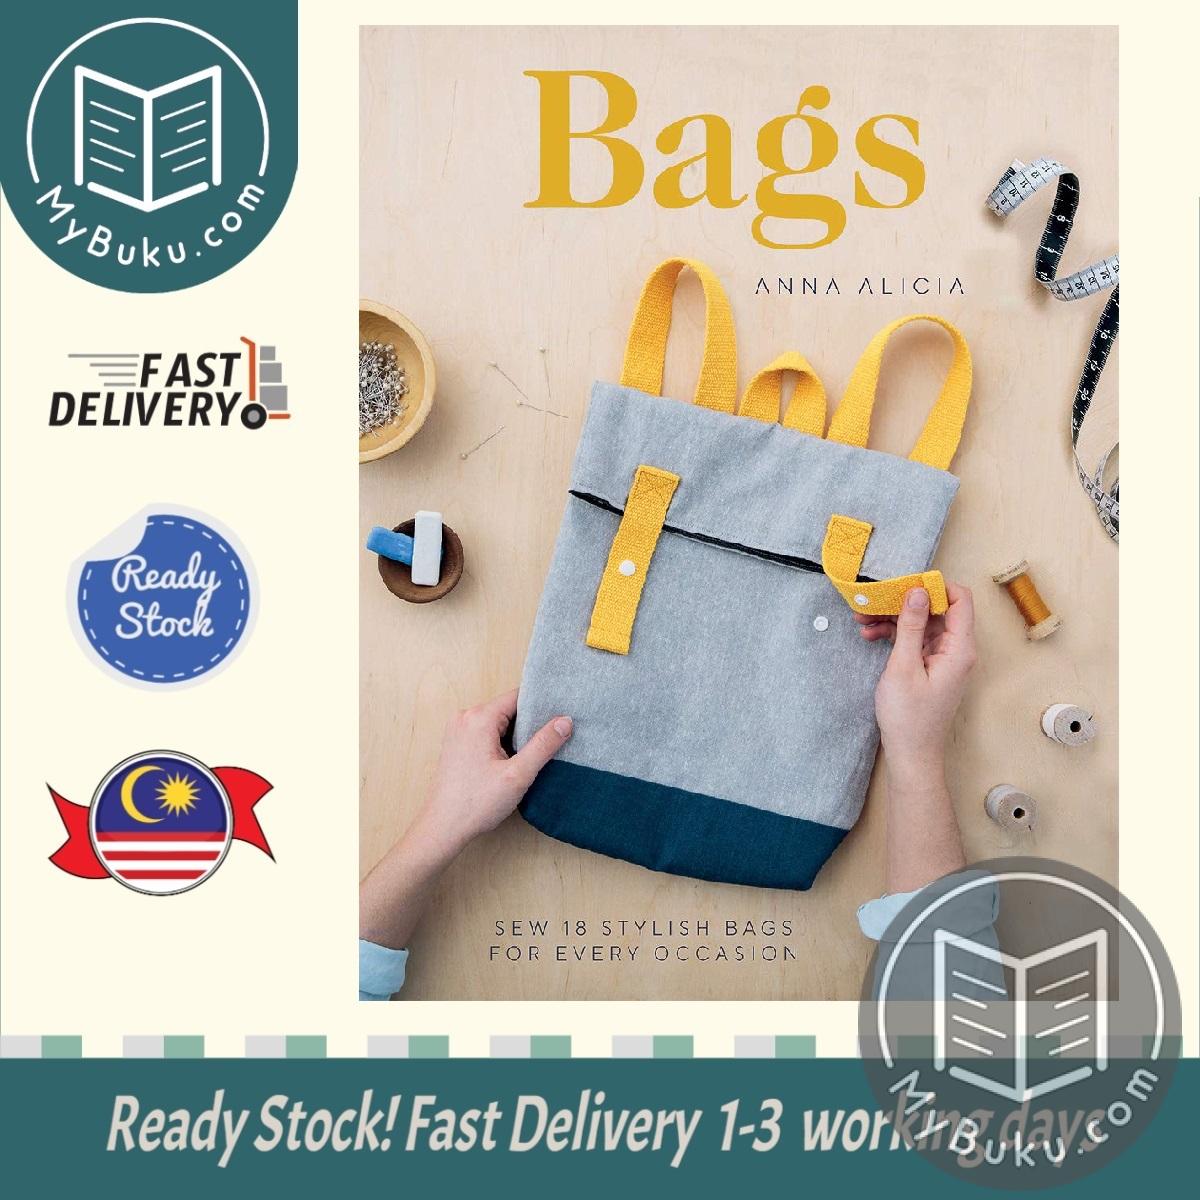 Bags: Sew 18 Stylish Bags for Every Occasion - Anna Alicia - 9781787133761 - Quadrille Publishing Ltd